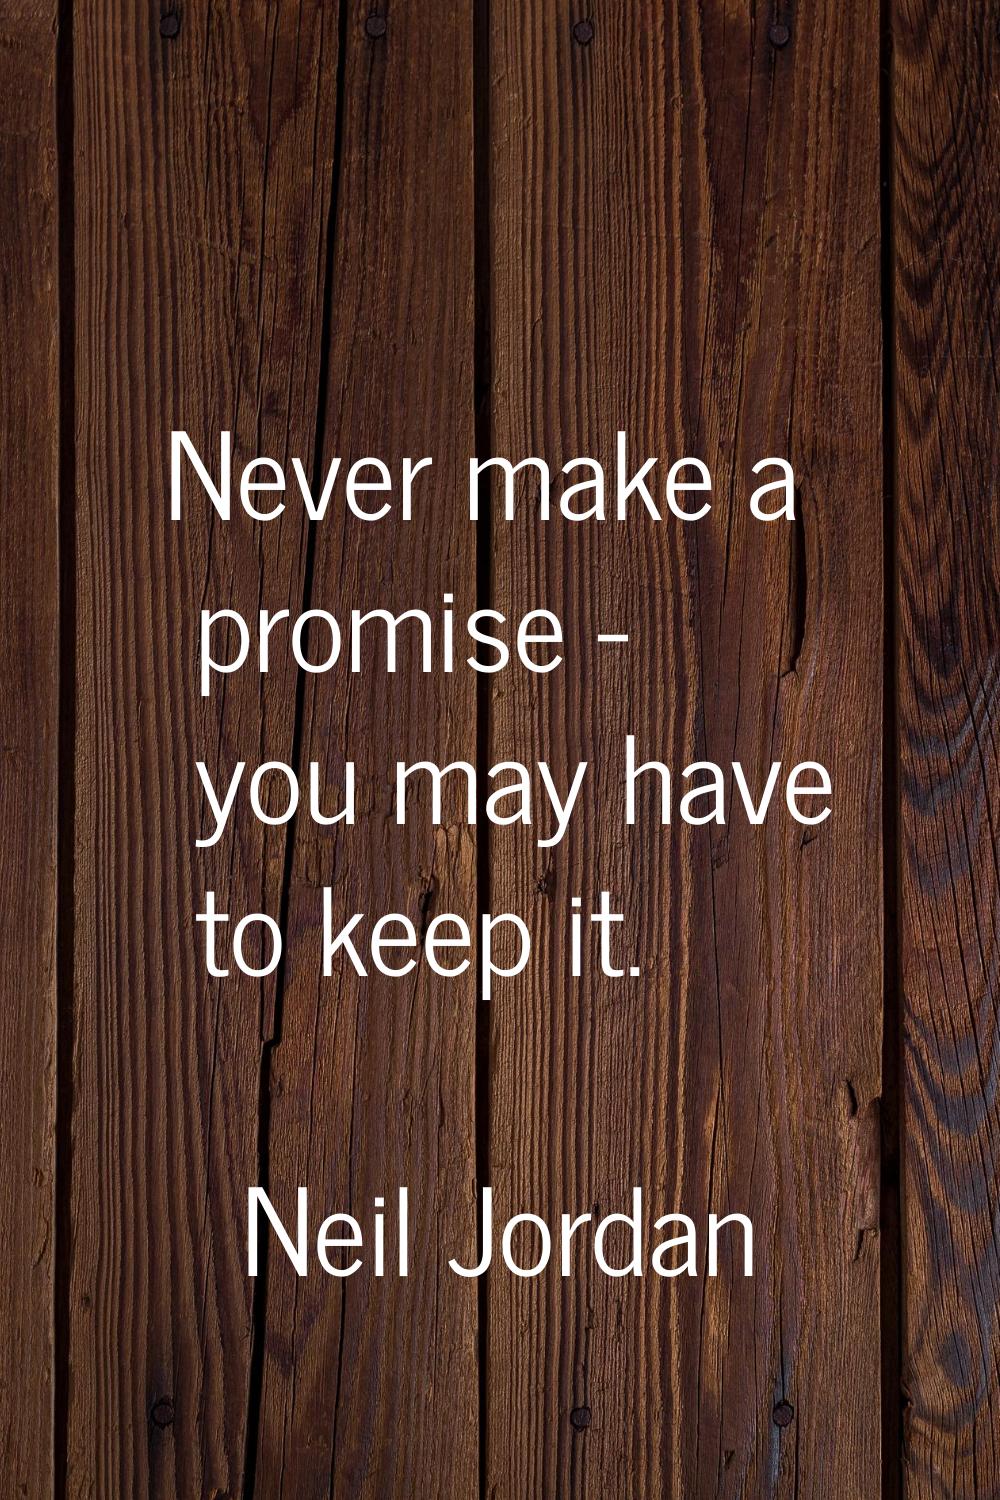 Never make a promise - you may have to keep it.